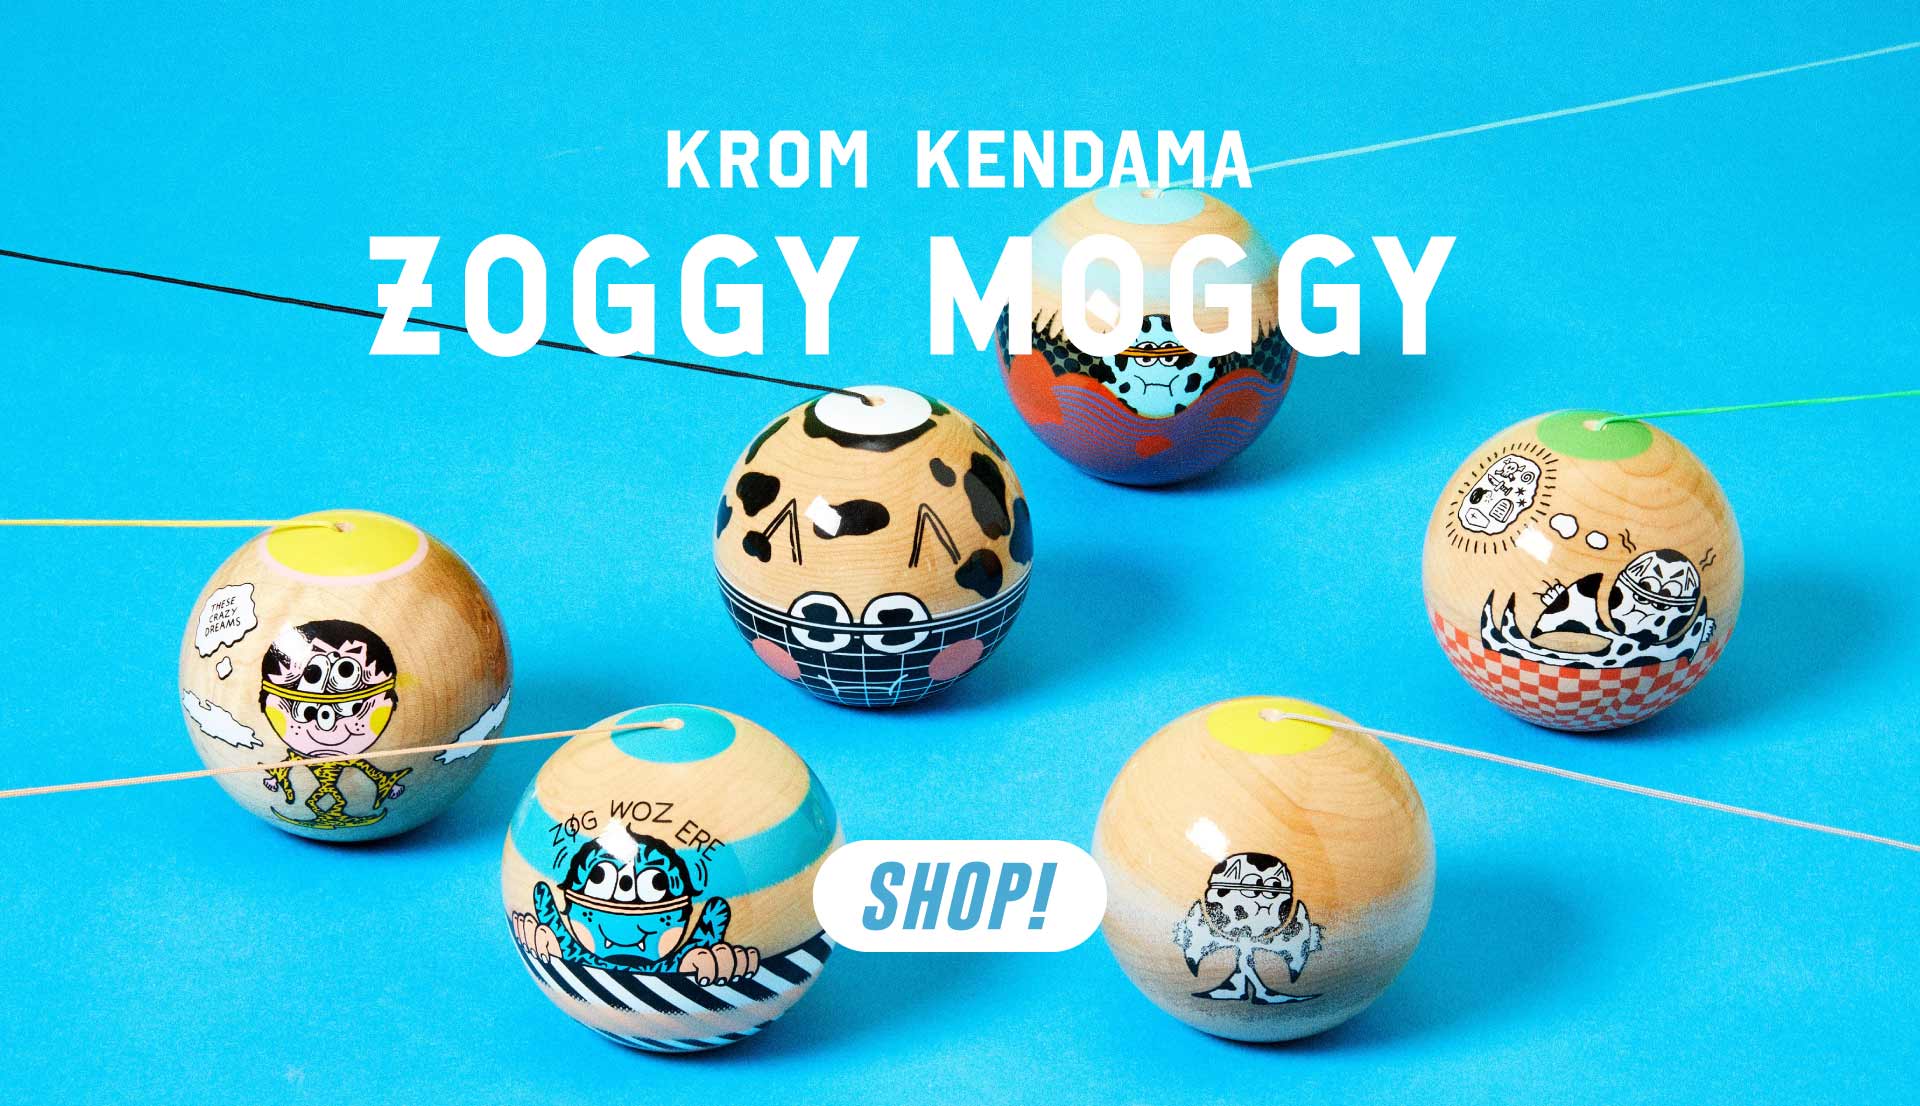 home_zoggy_moggy_krom